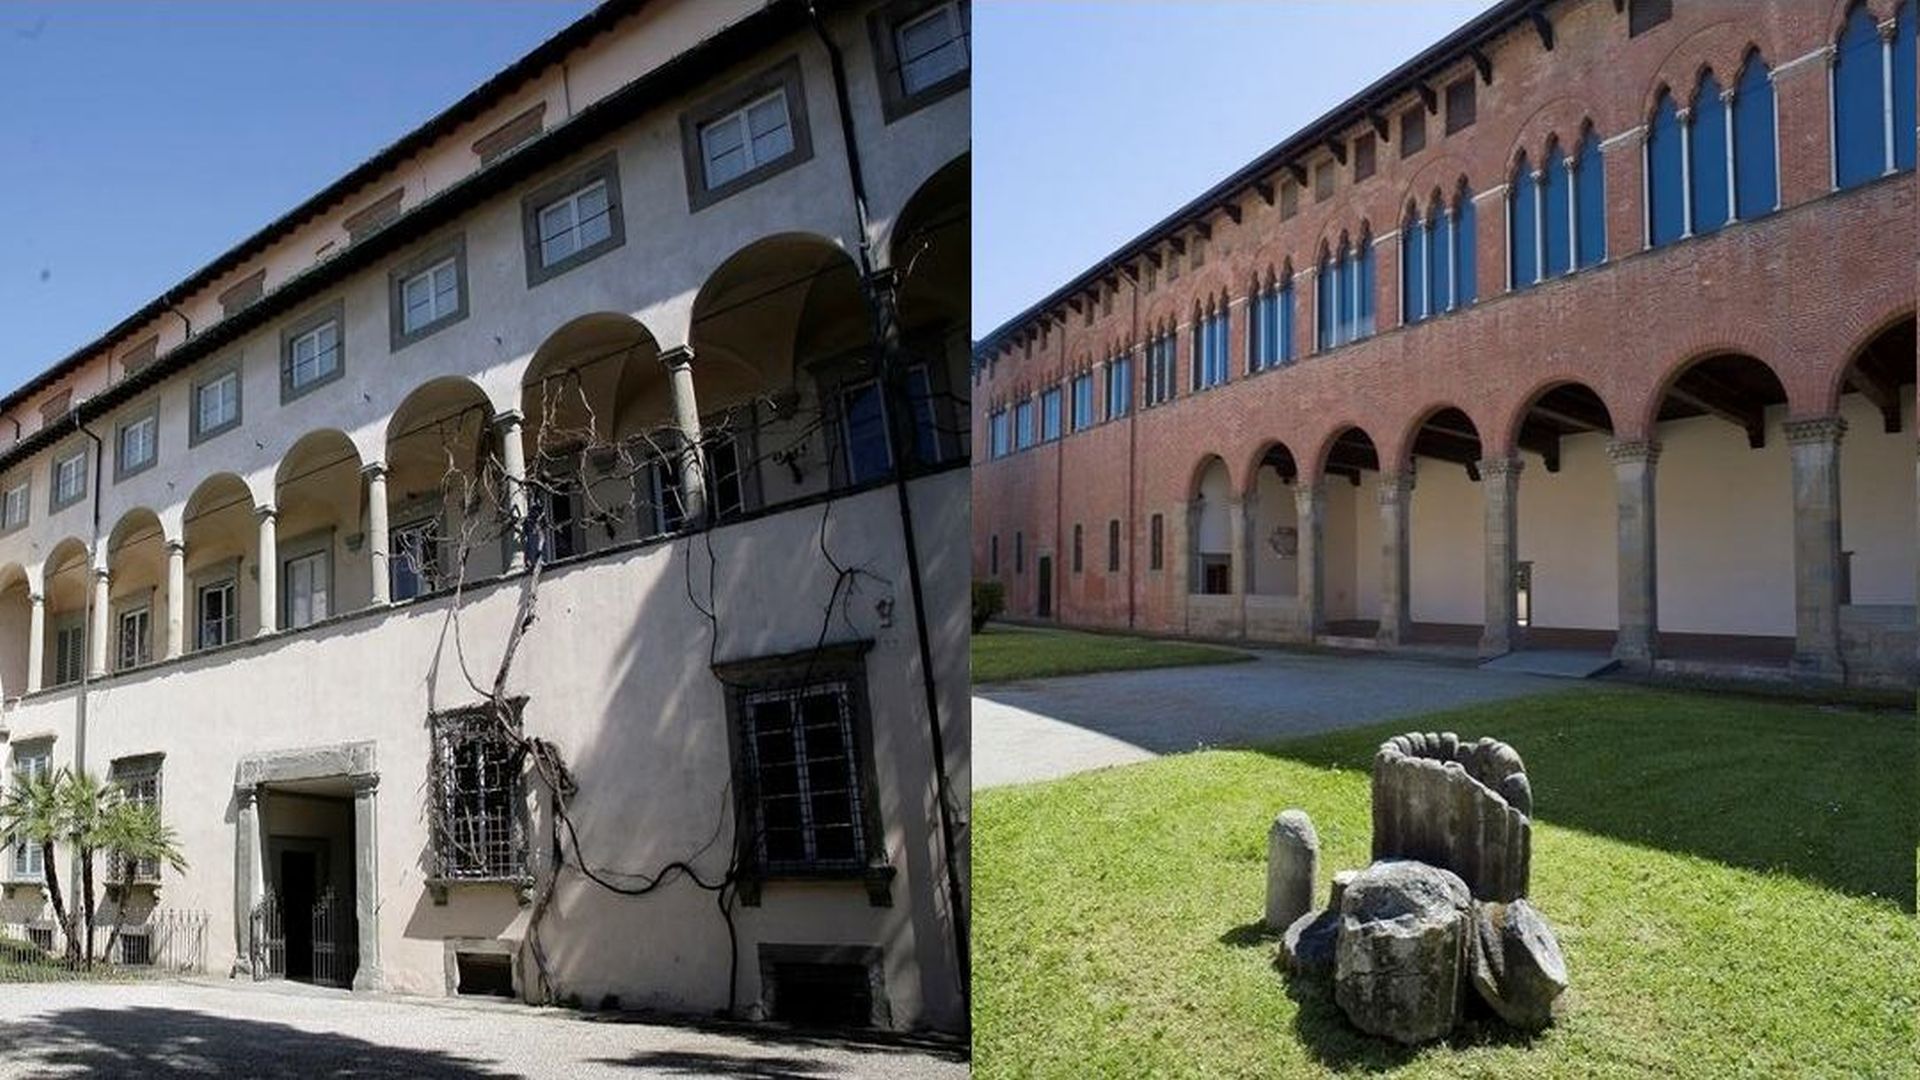 The National Museums of Lucca